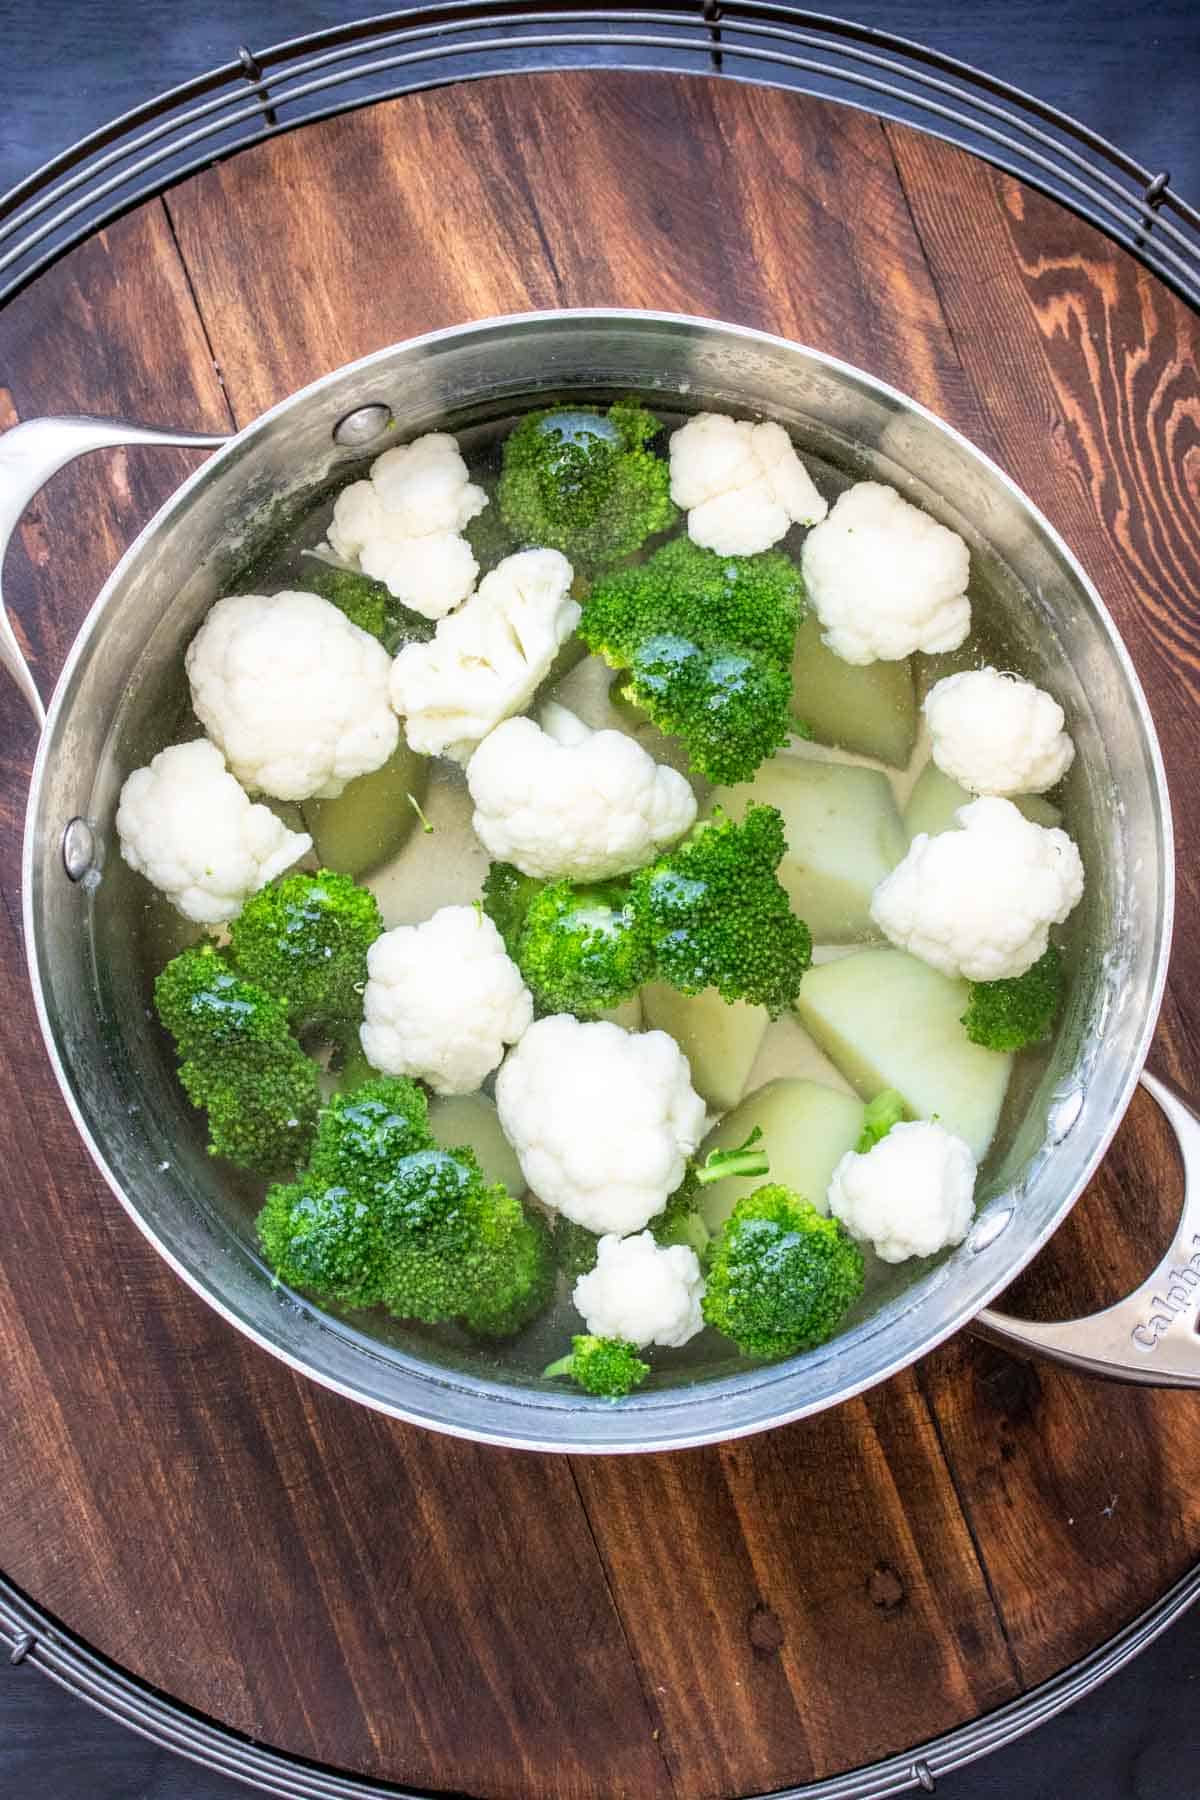 Cauliflower, broccoli and potato cooking in a pot